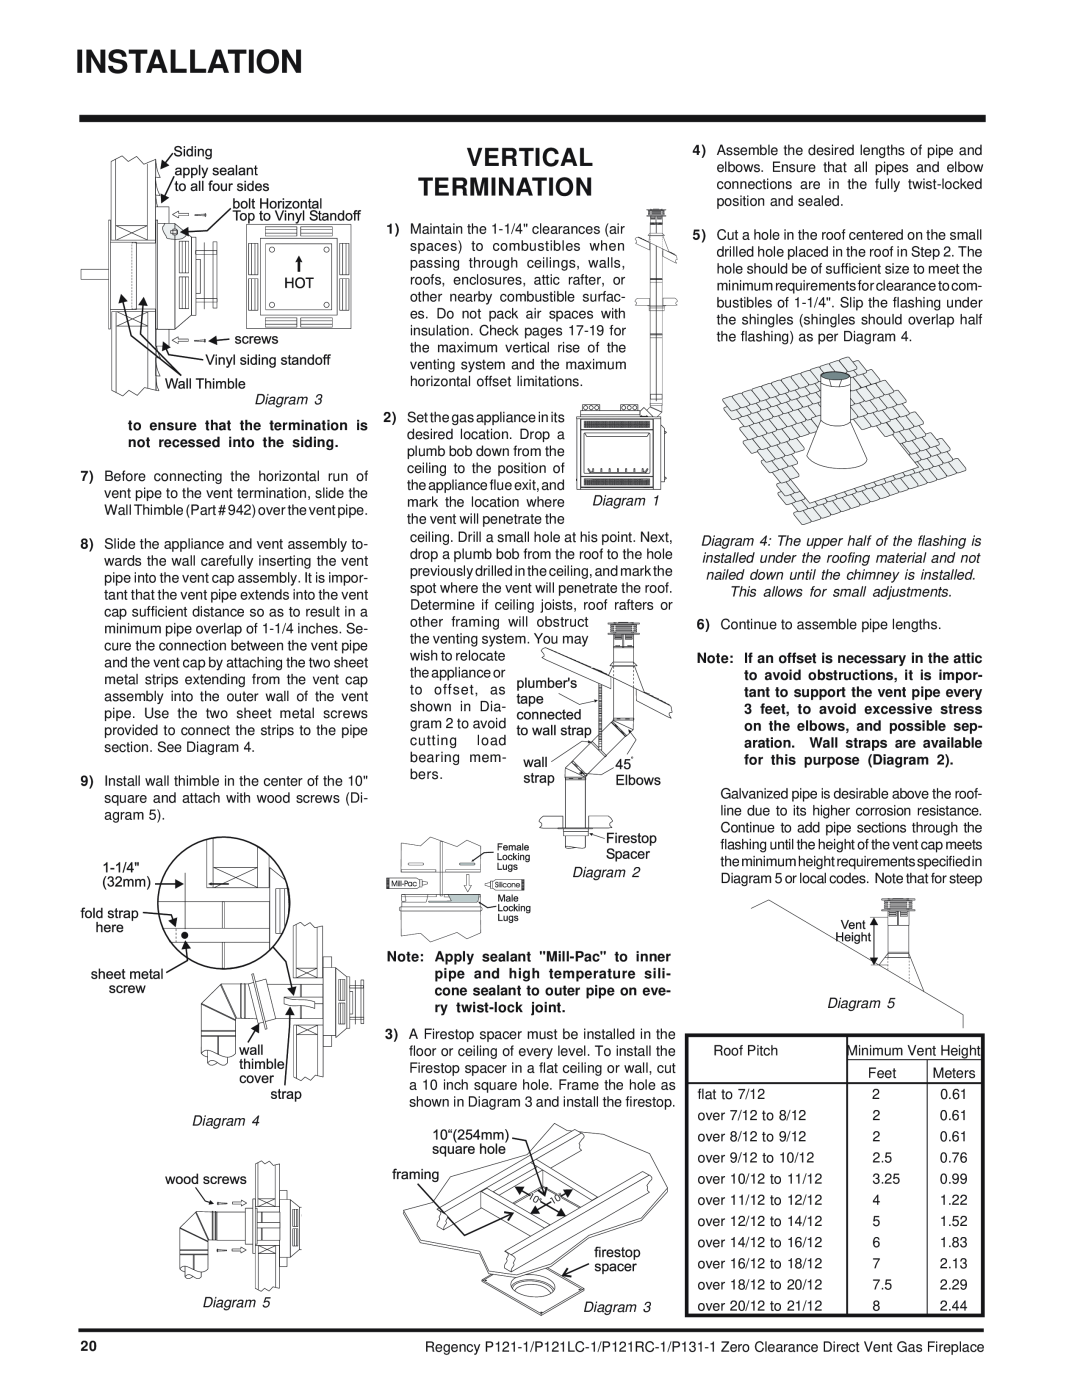 Regency P121RC, P121LC, P131 Installation, Vertical Termination, Diagram Diagram, This allows for small adjustments 